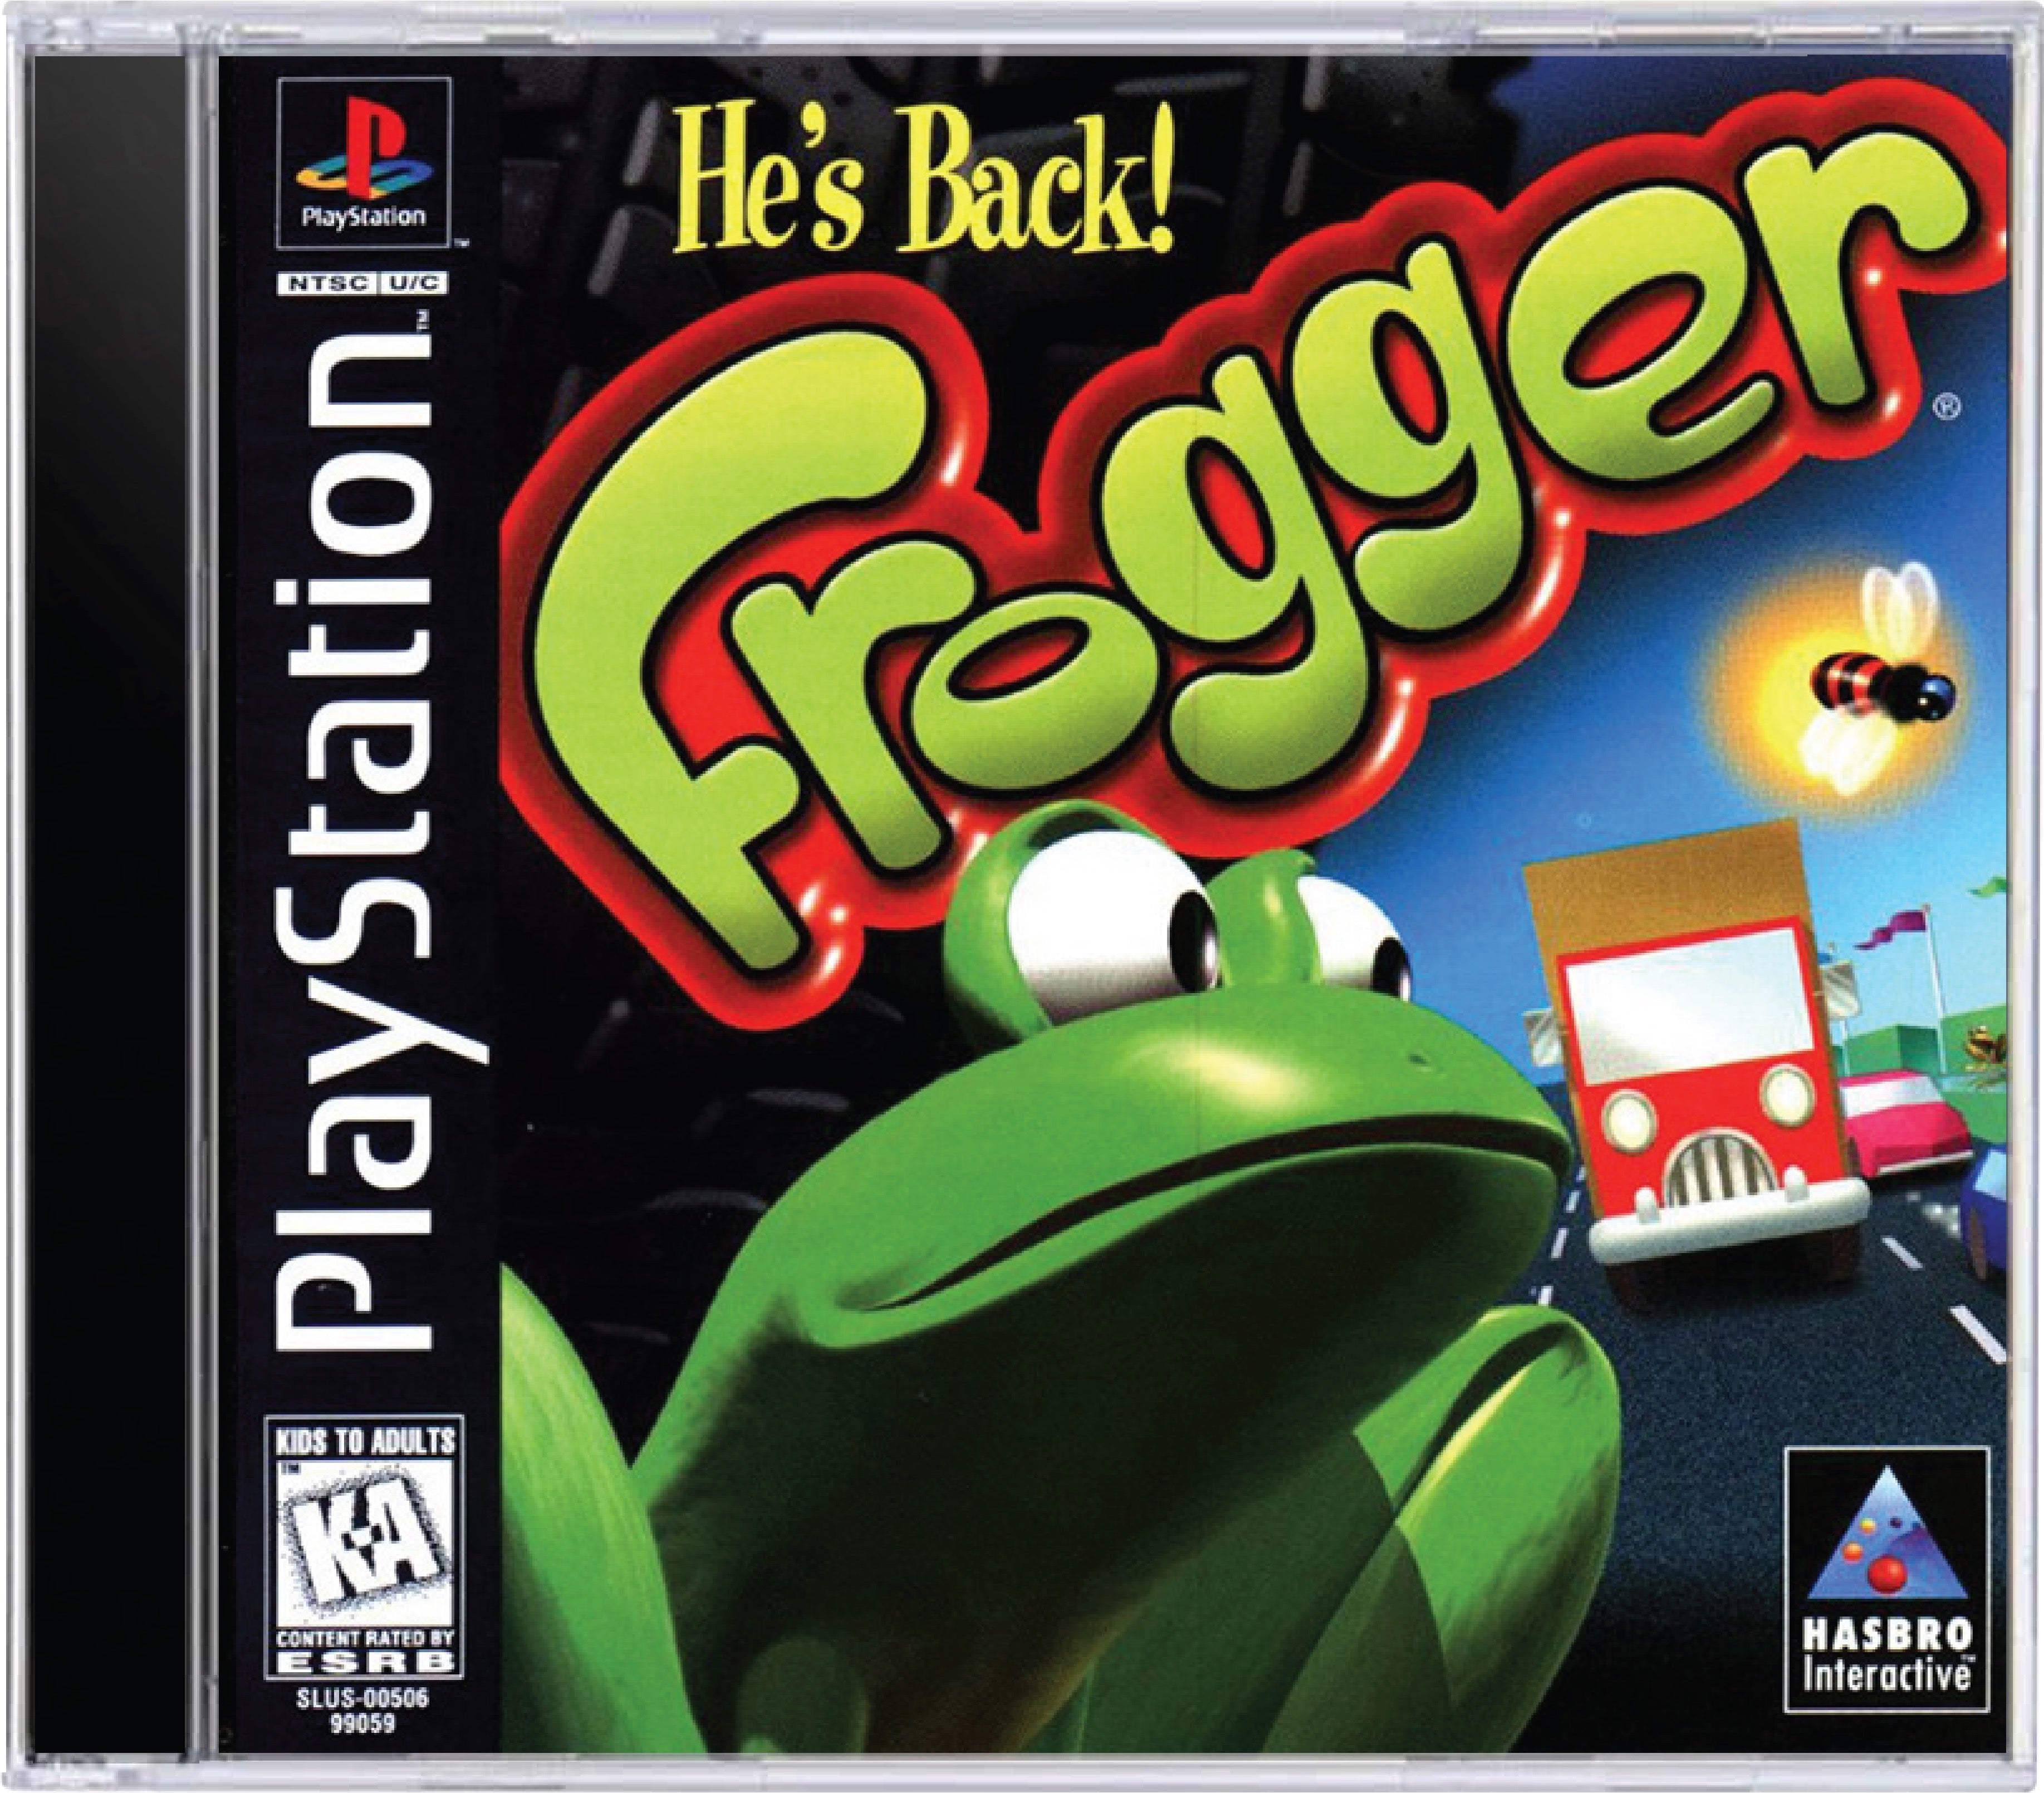 Frogger Cover Art and Product Photo